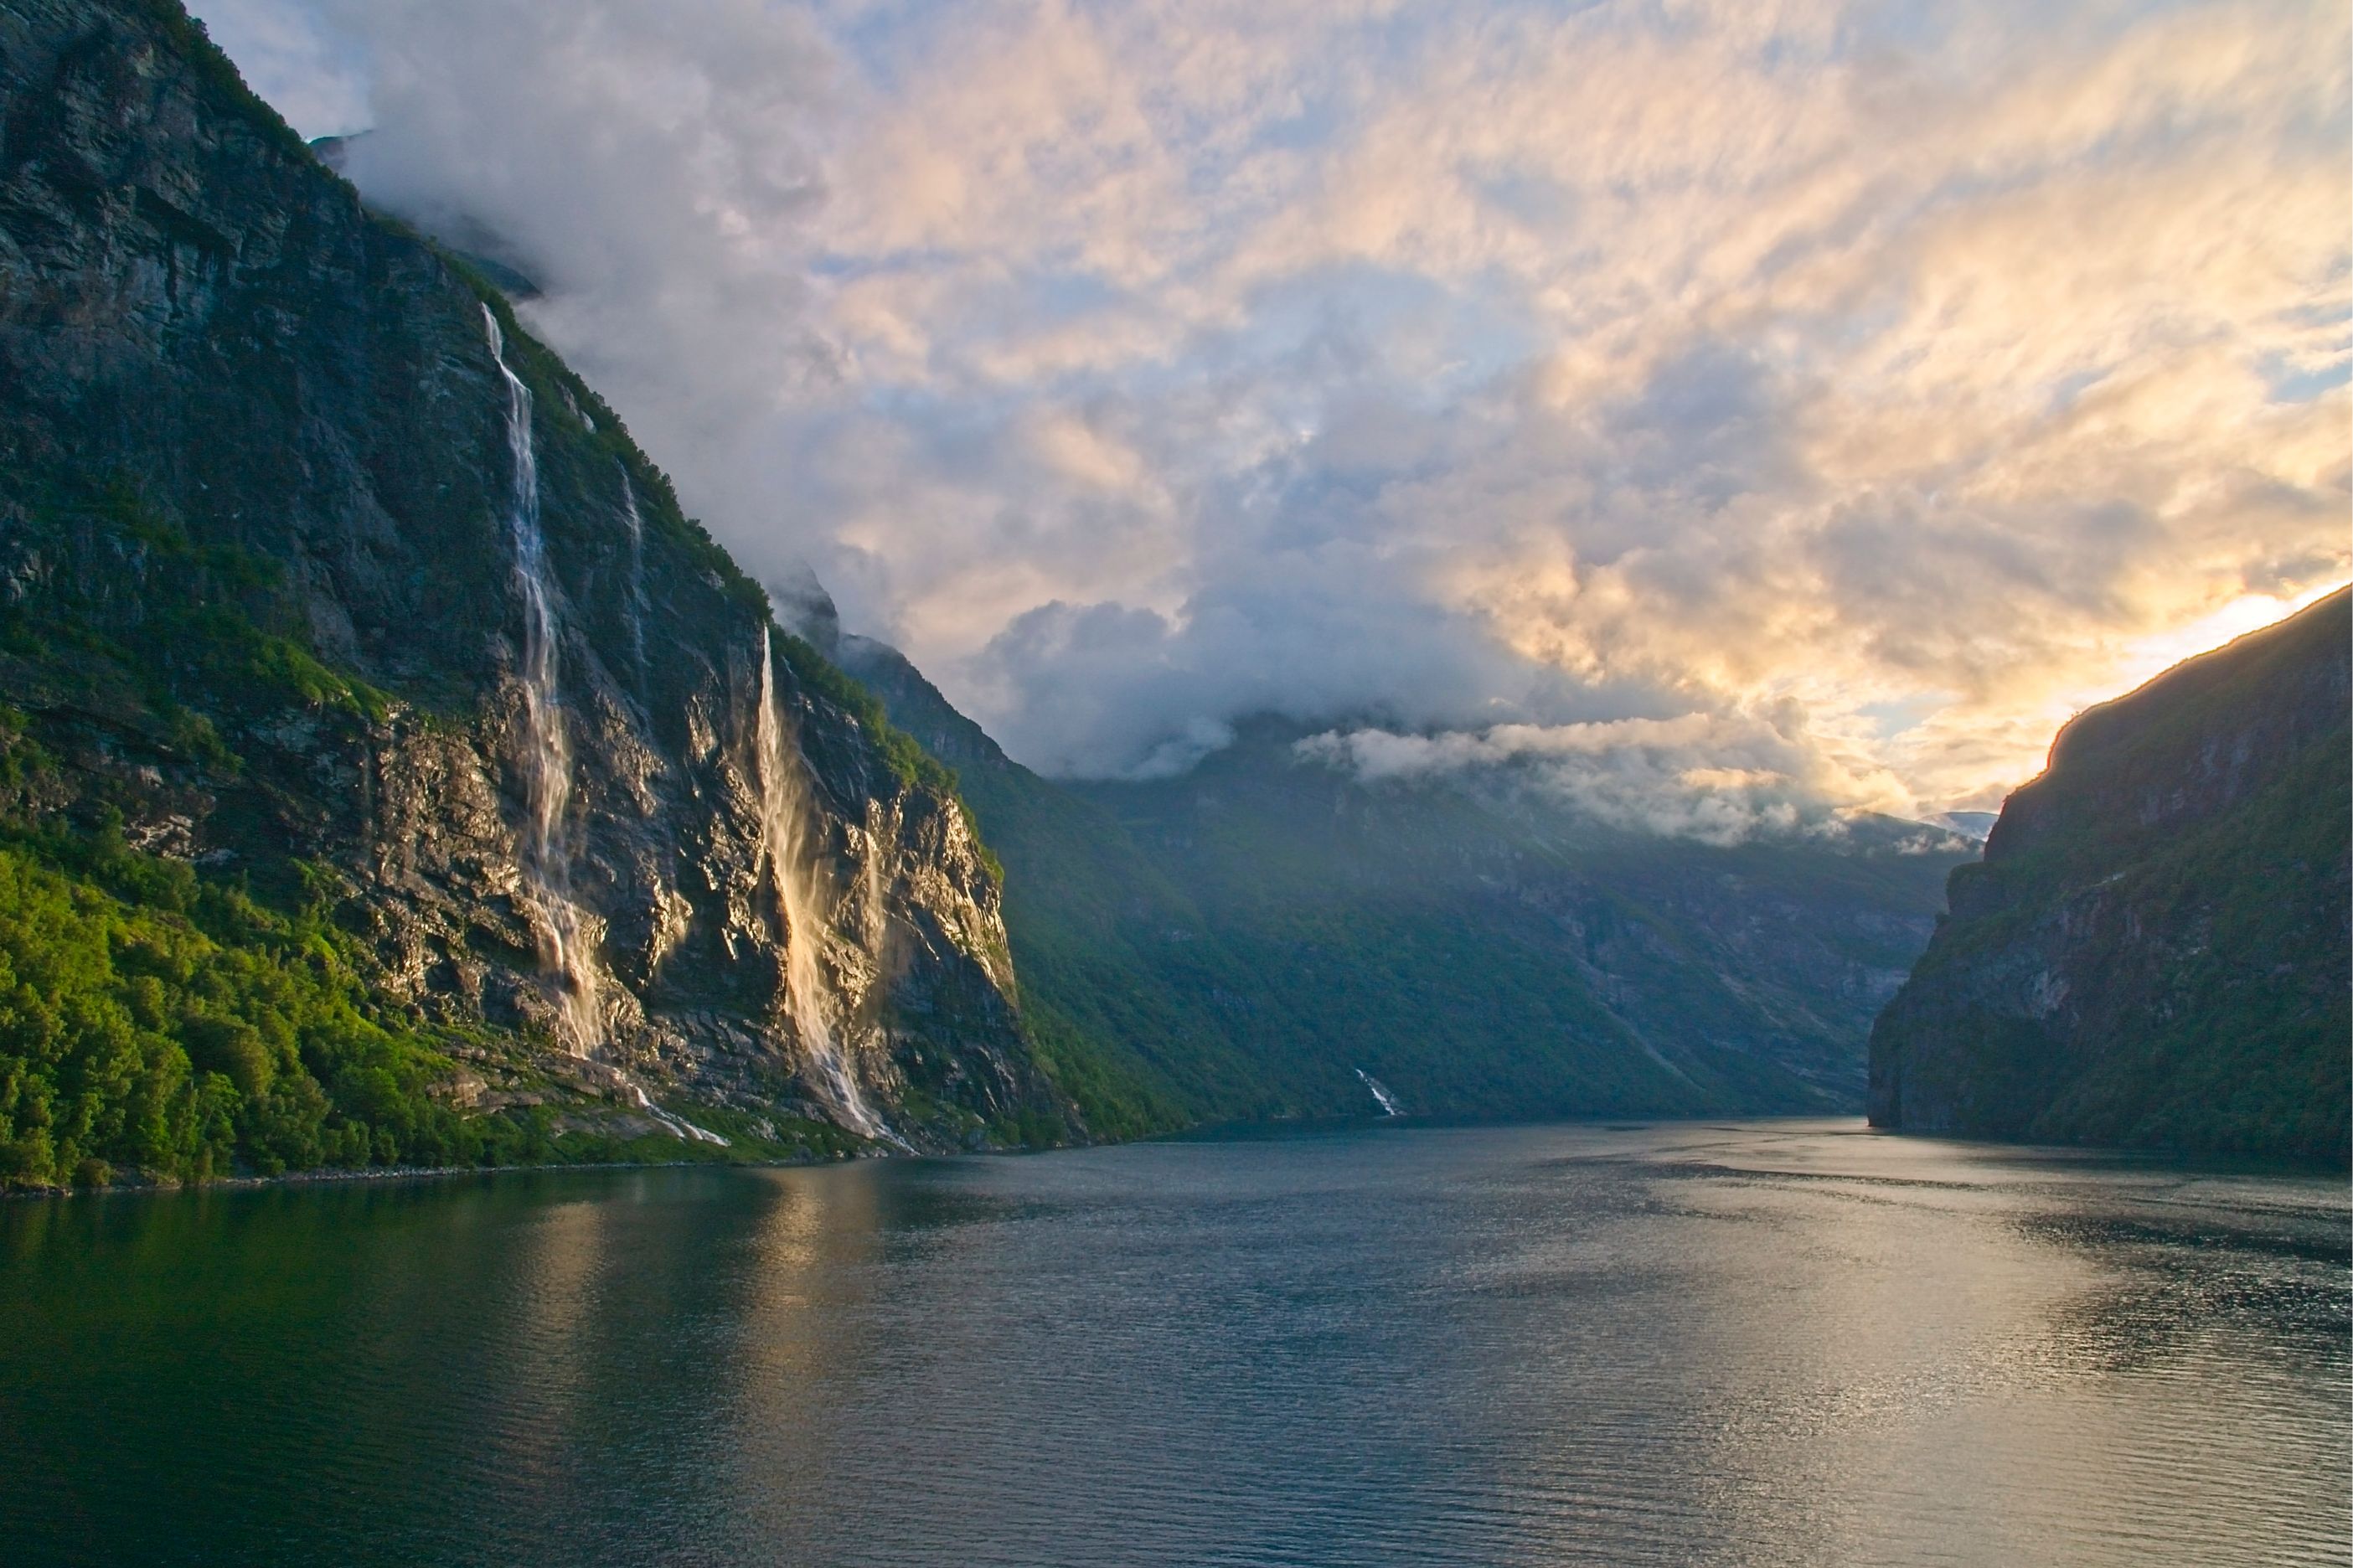 The UNESCO-protected Geirangerfjord in Norway